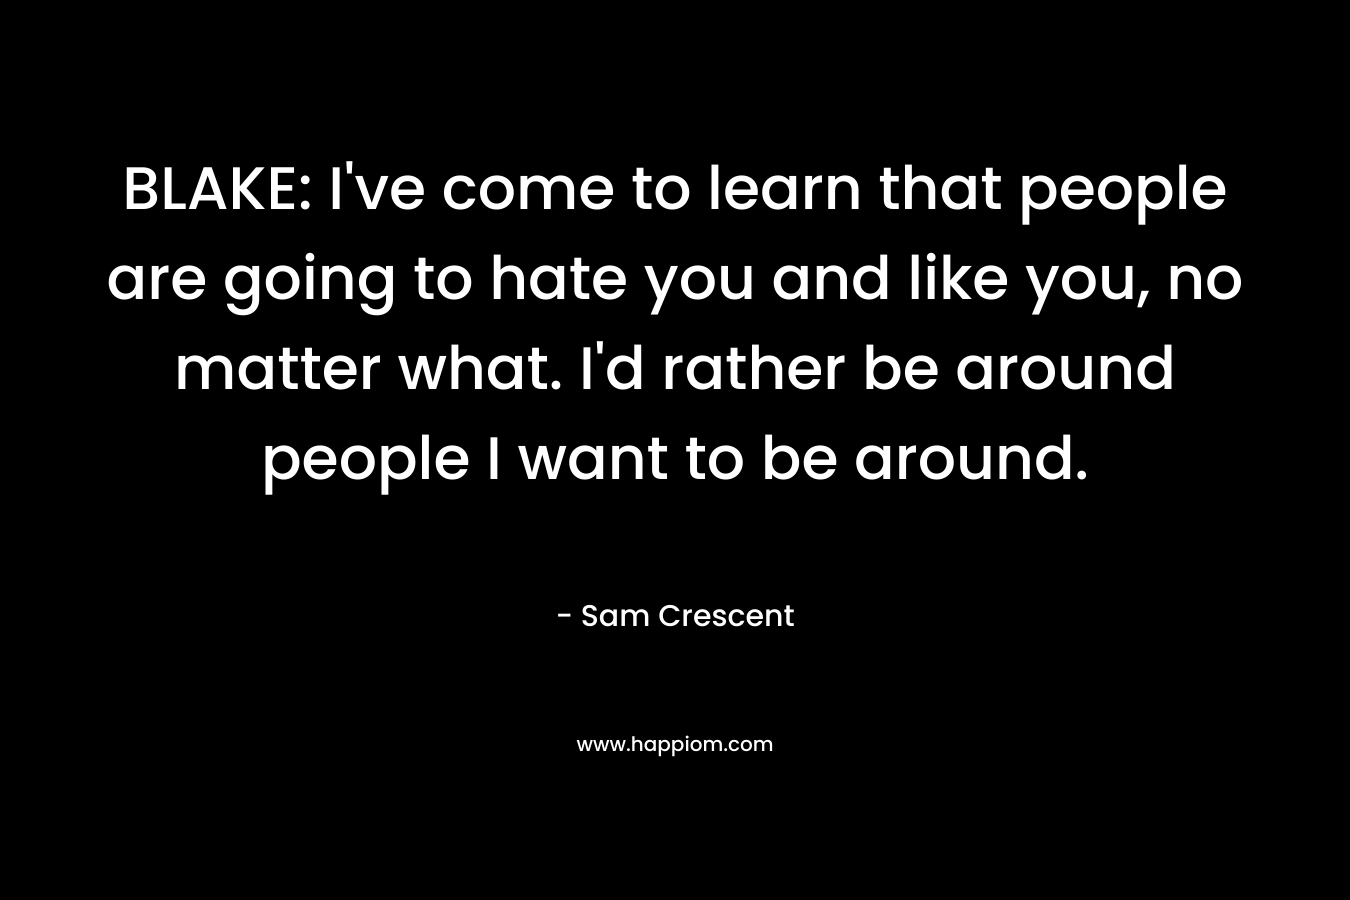 BLAKE: I’ve come to learn that people are going to hate you and like you, no matter what. I’d rather be around people I want to be around. – Sam Crescent